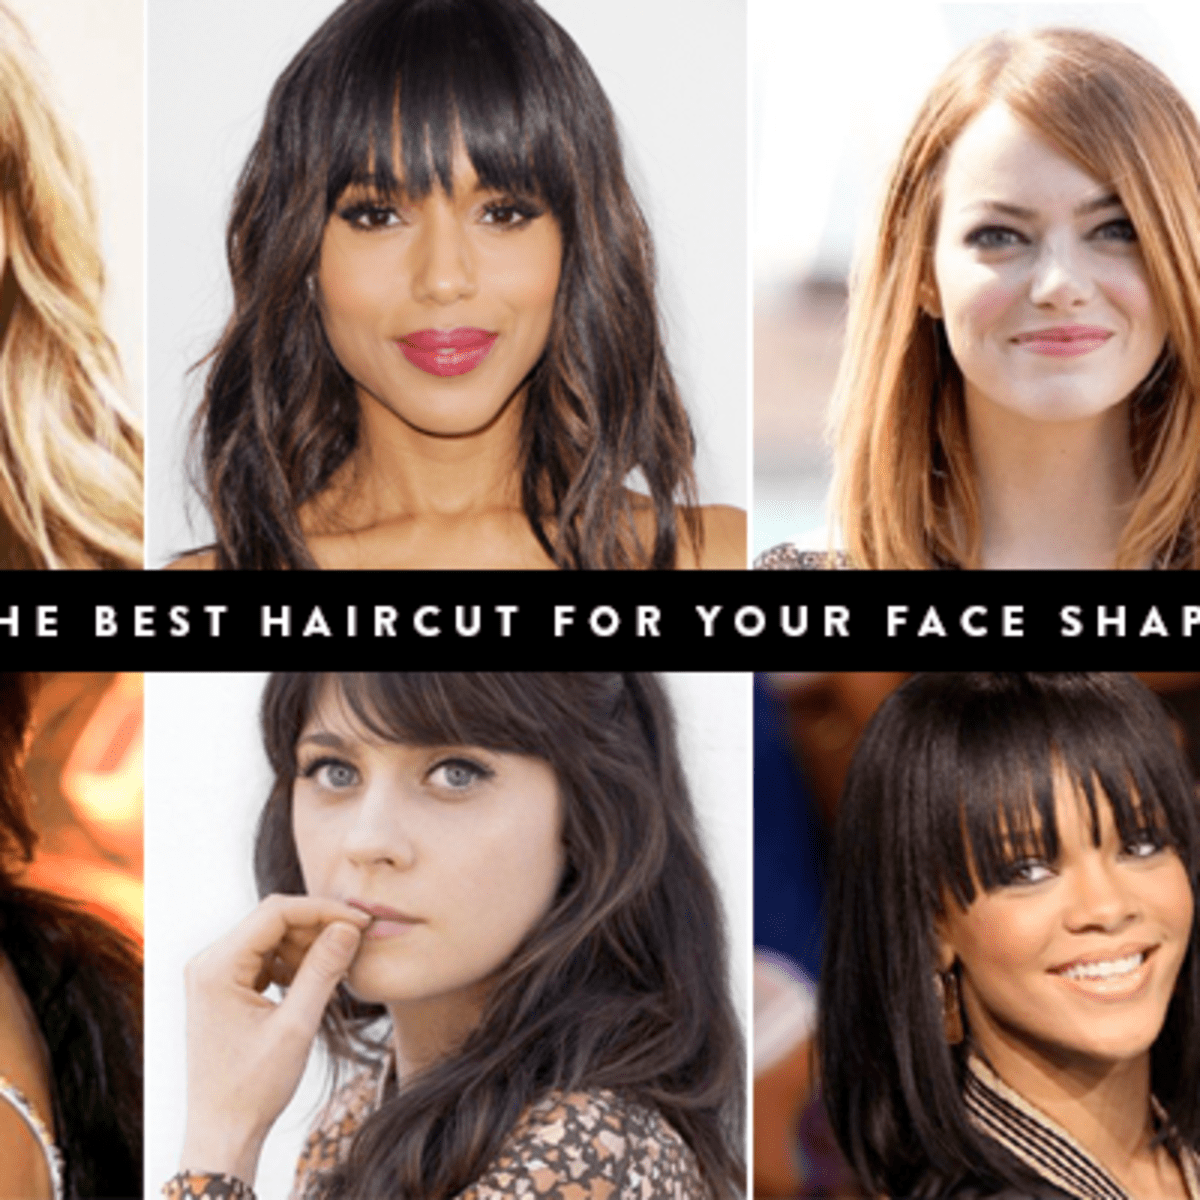 Discover the Best Haircut For Your Face Shape  Verily